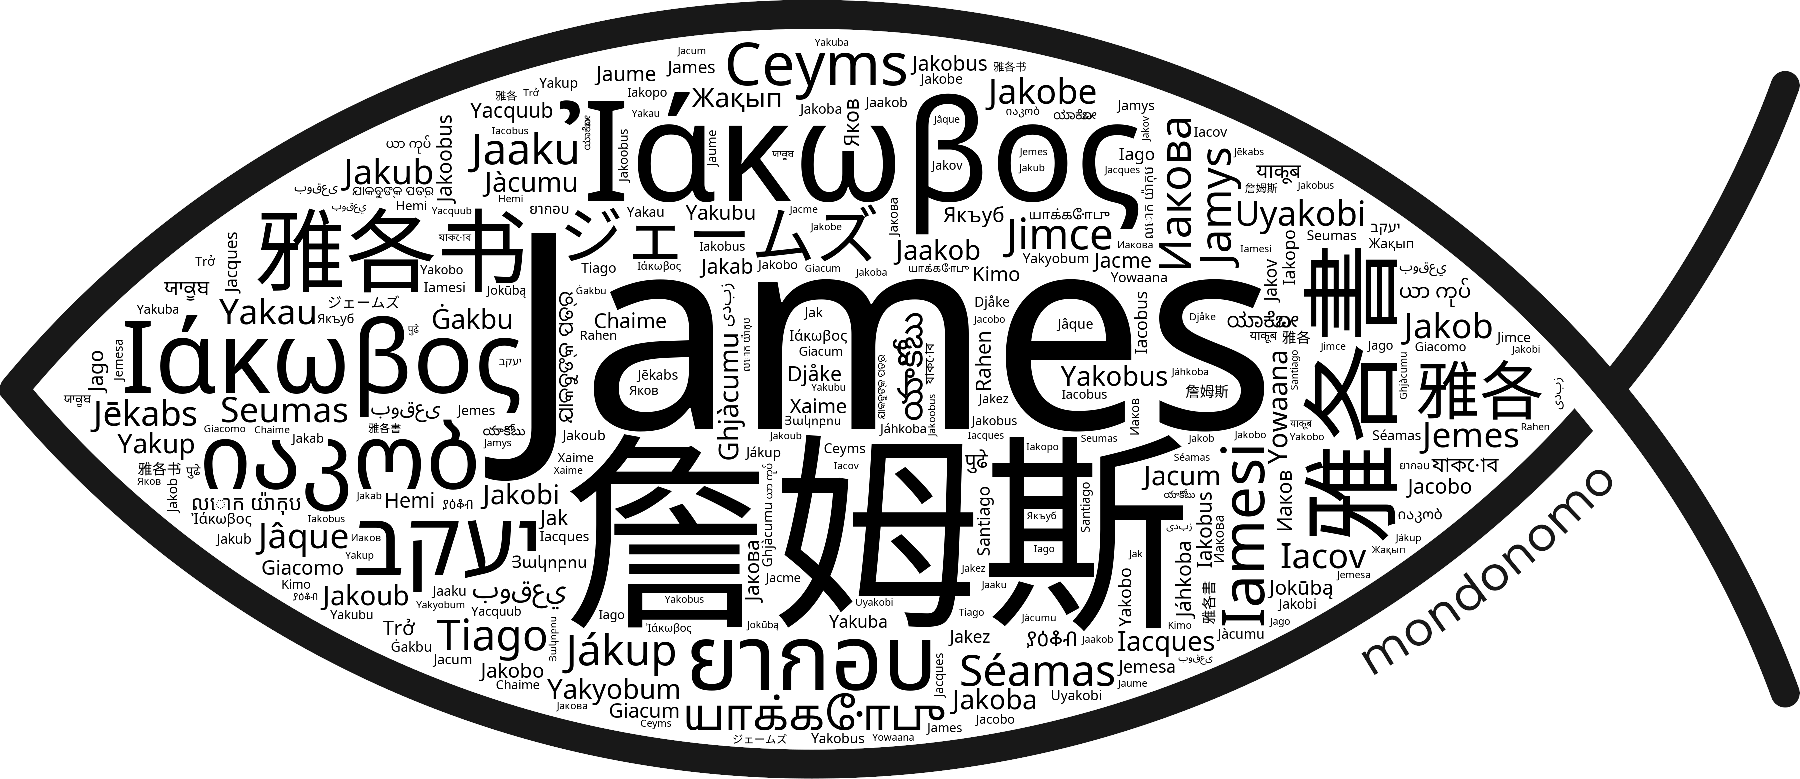 Name James in the world's Bibles